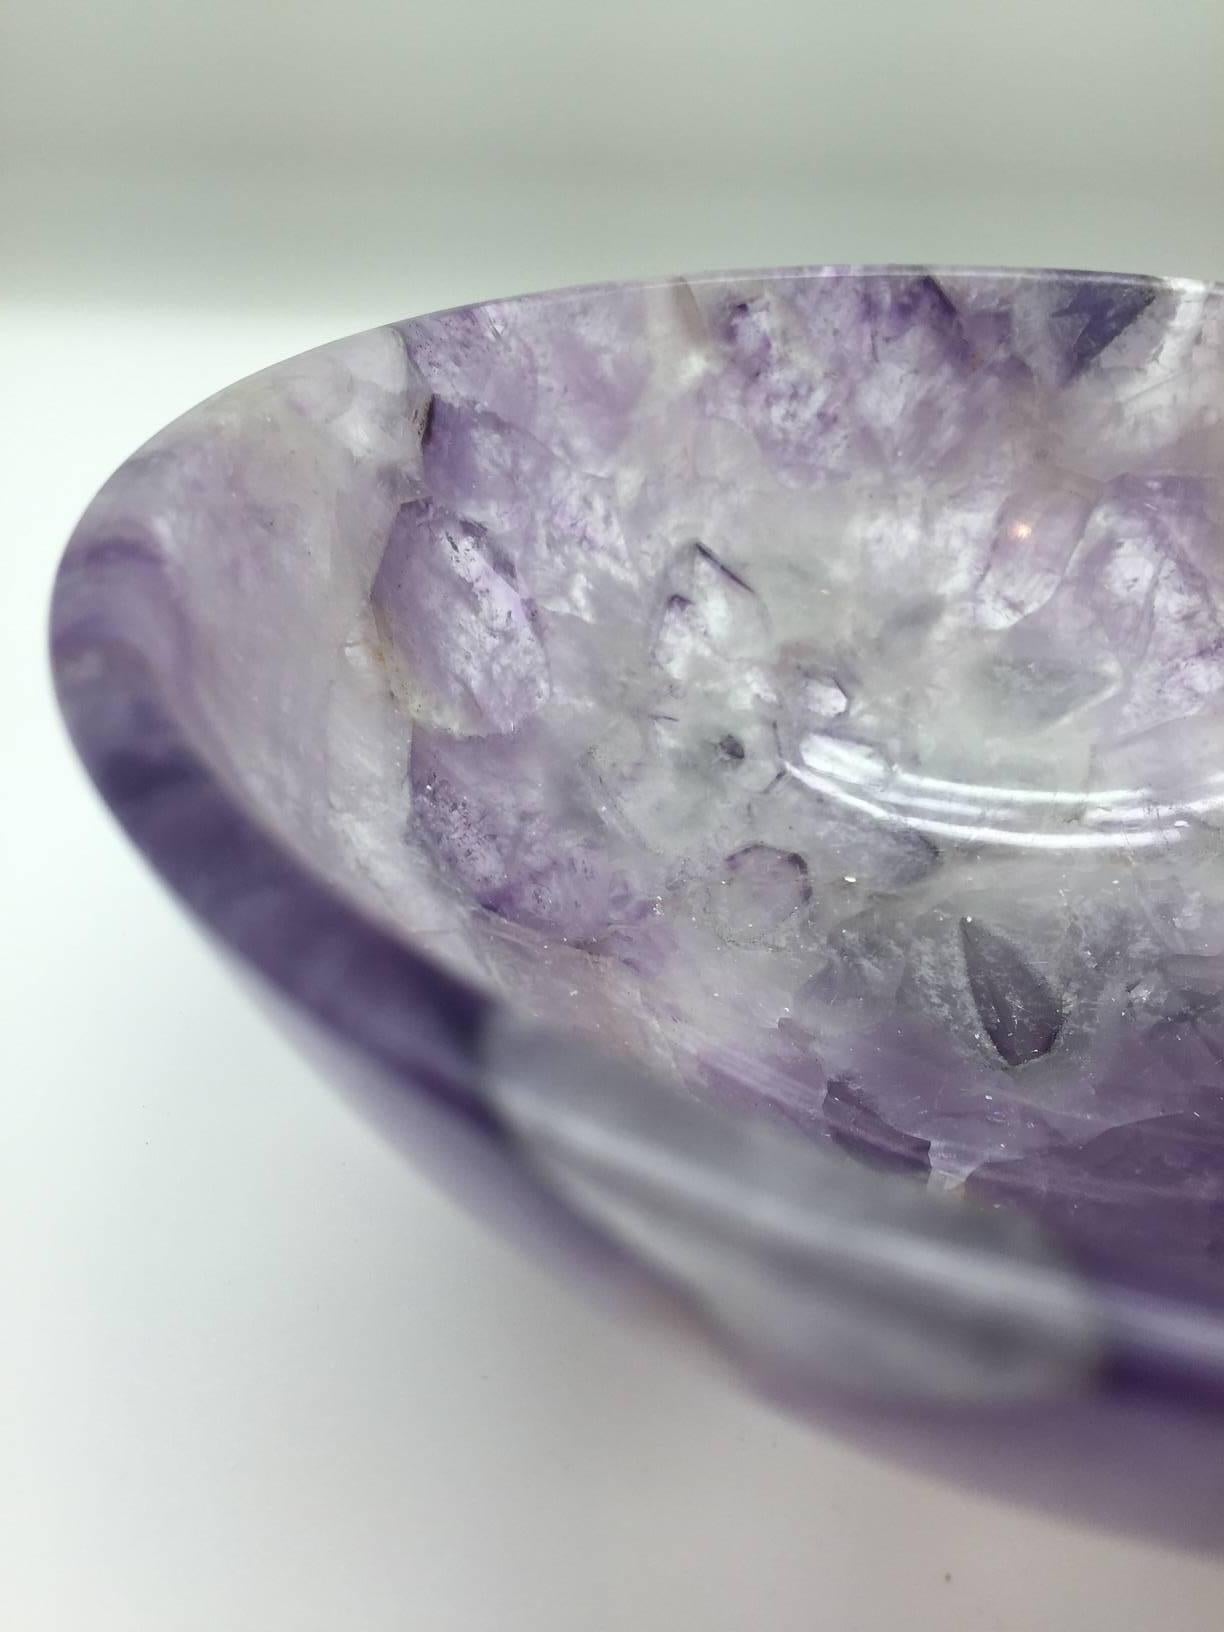 Hand-carved and polished out of a solid piece of semi-precious amethyst gemstone. This 6